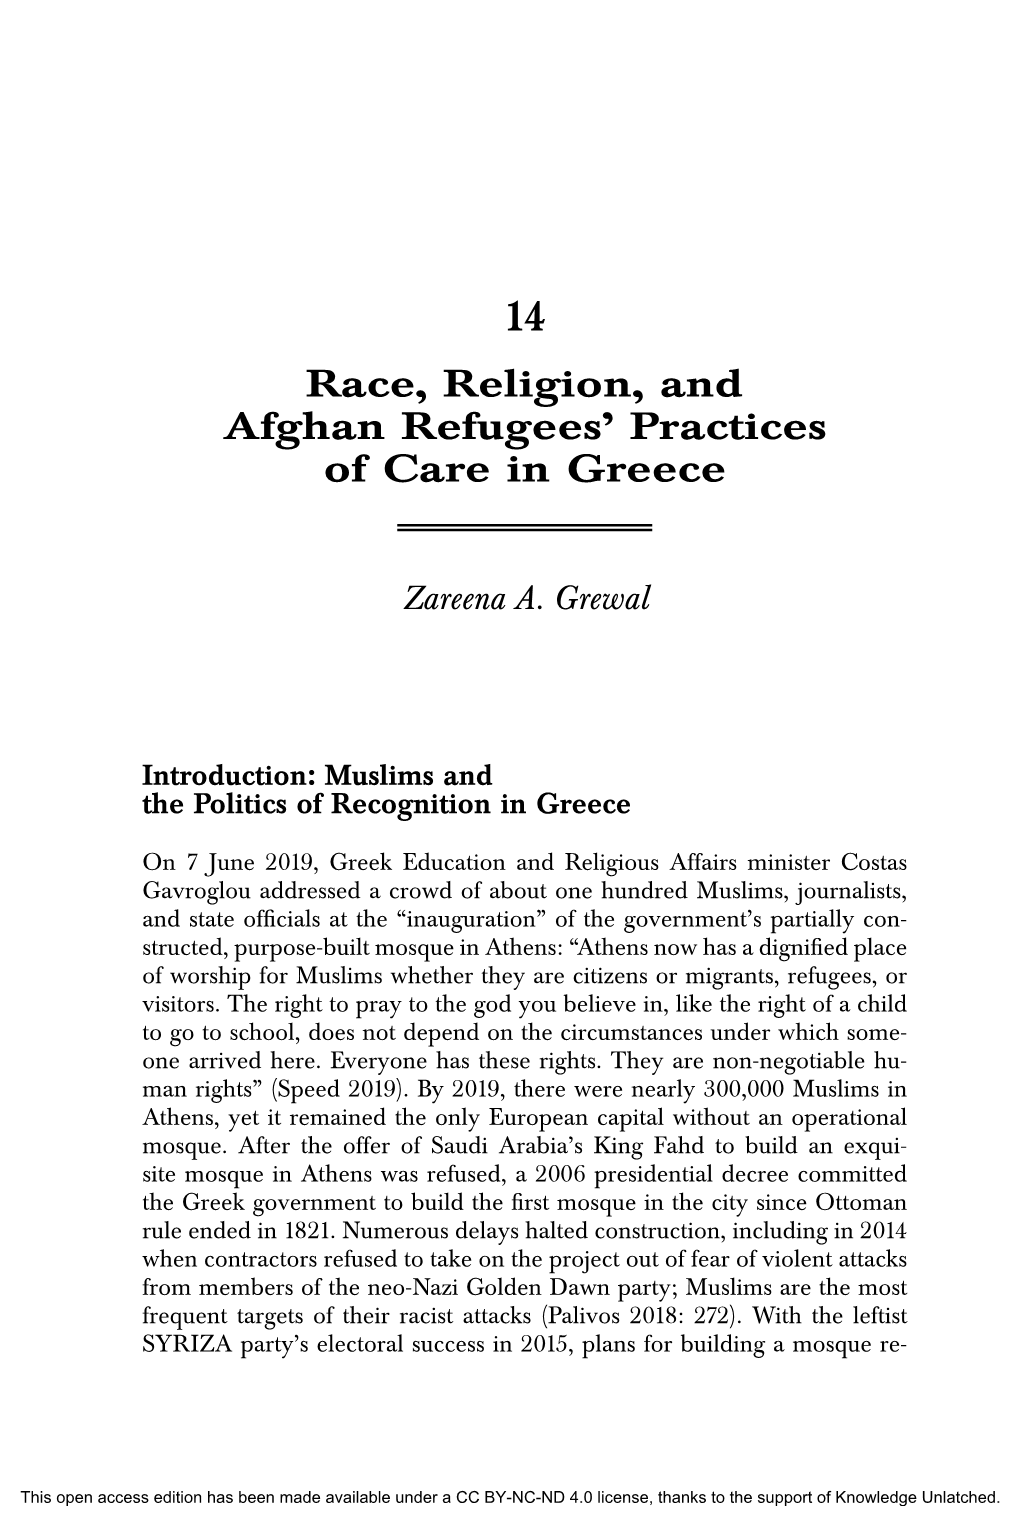 Race, Religion, and Afghan Refugees' Practices of Care in Greece